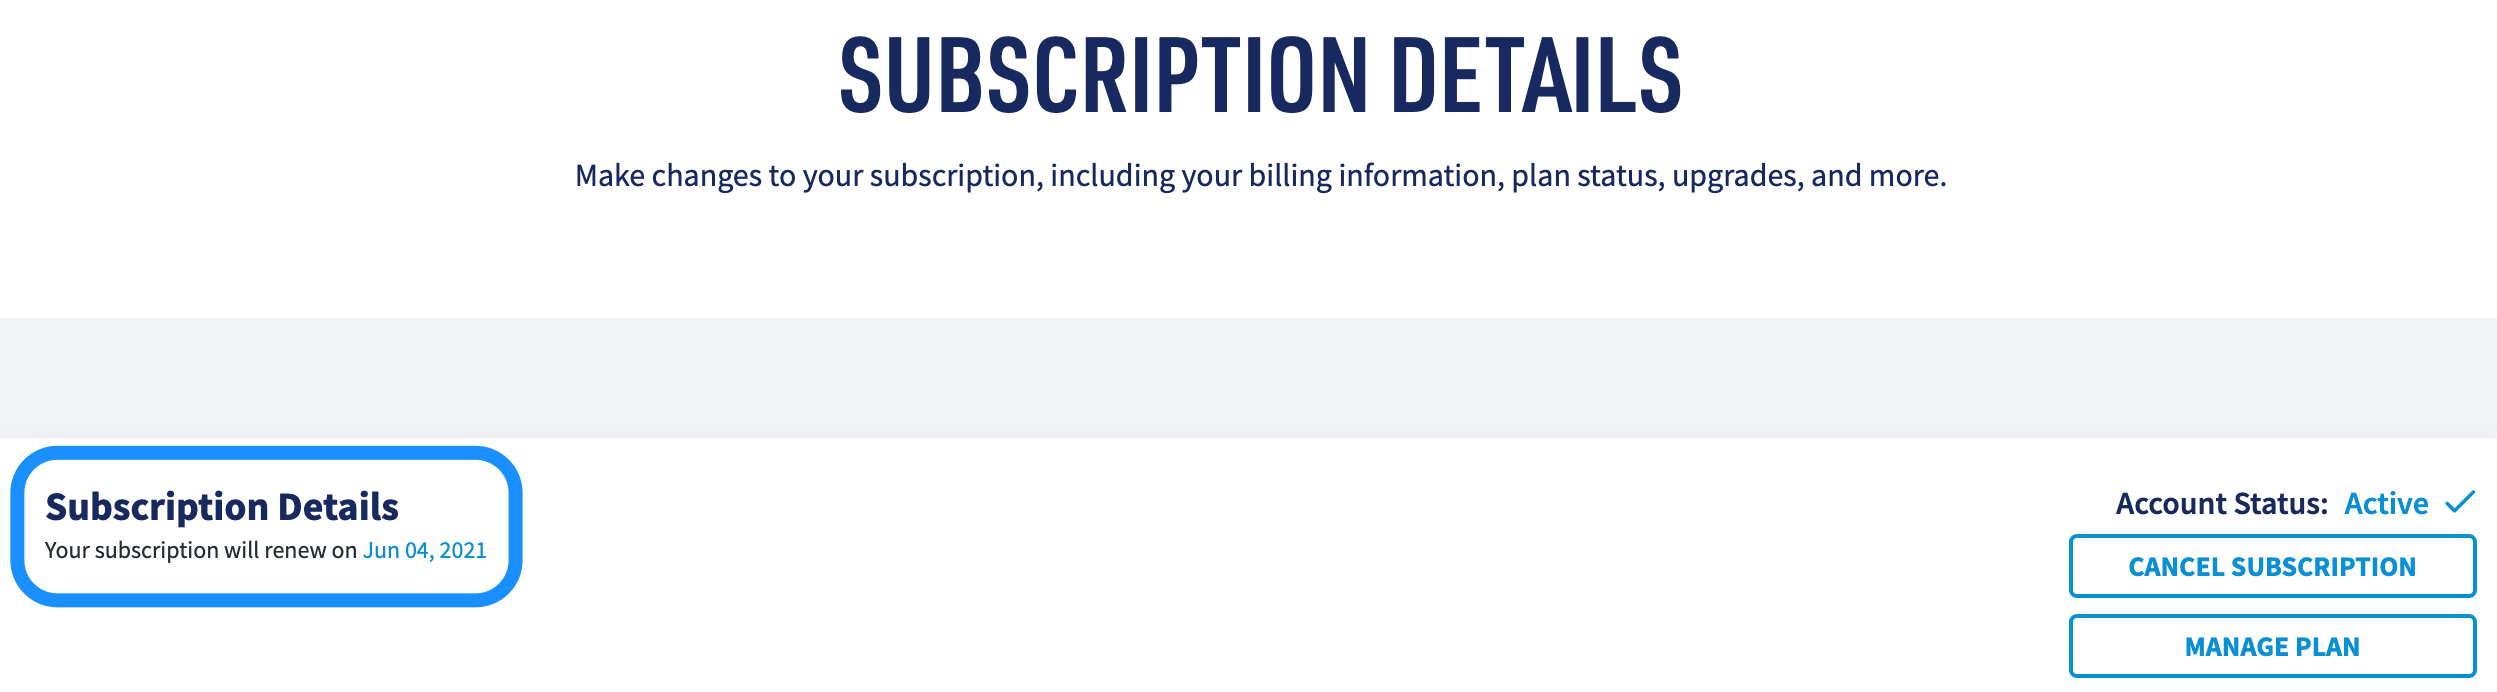 Subscription_Details_-_Plumb_s_Veterinary_Drugs-4.png